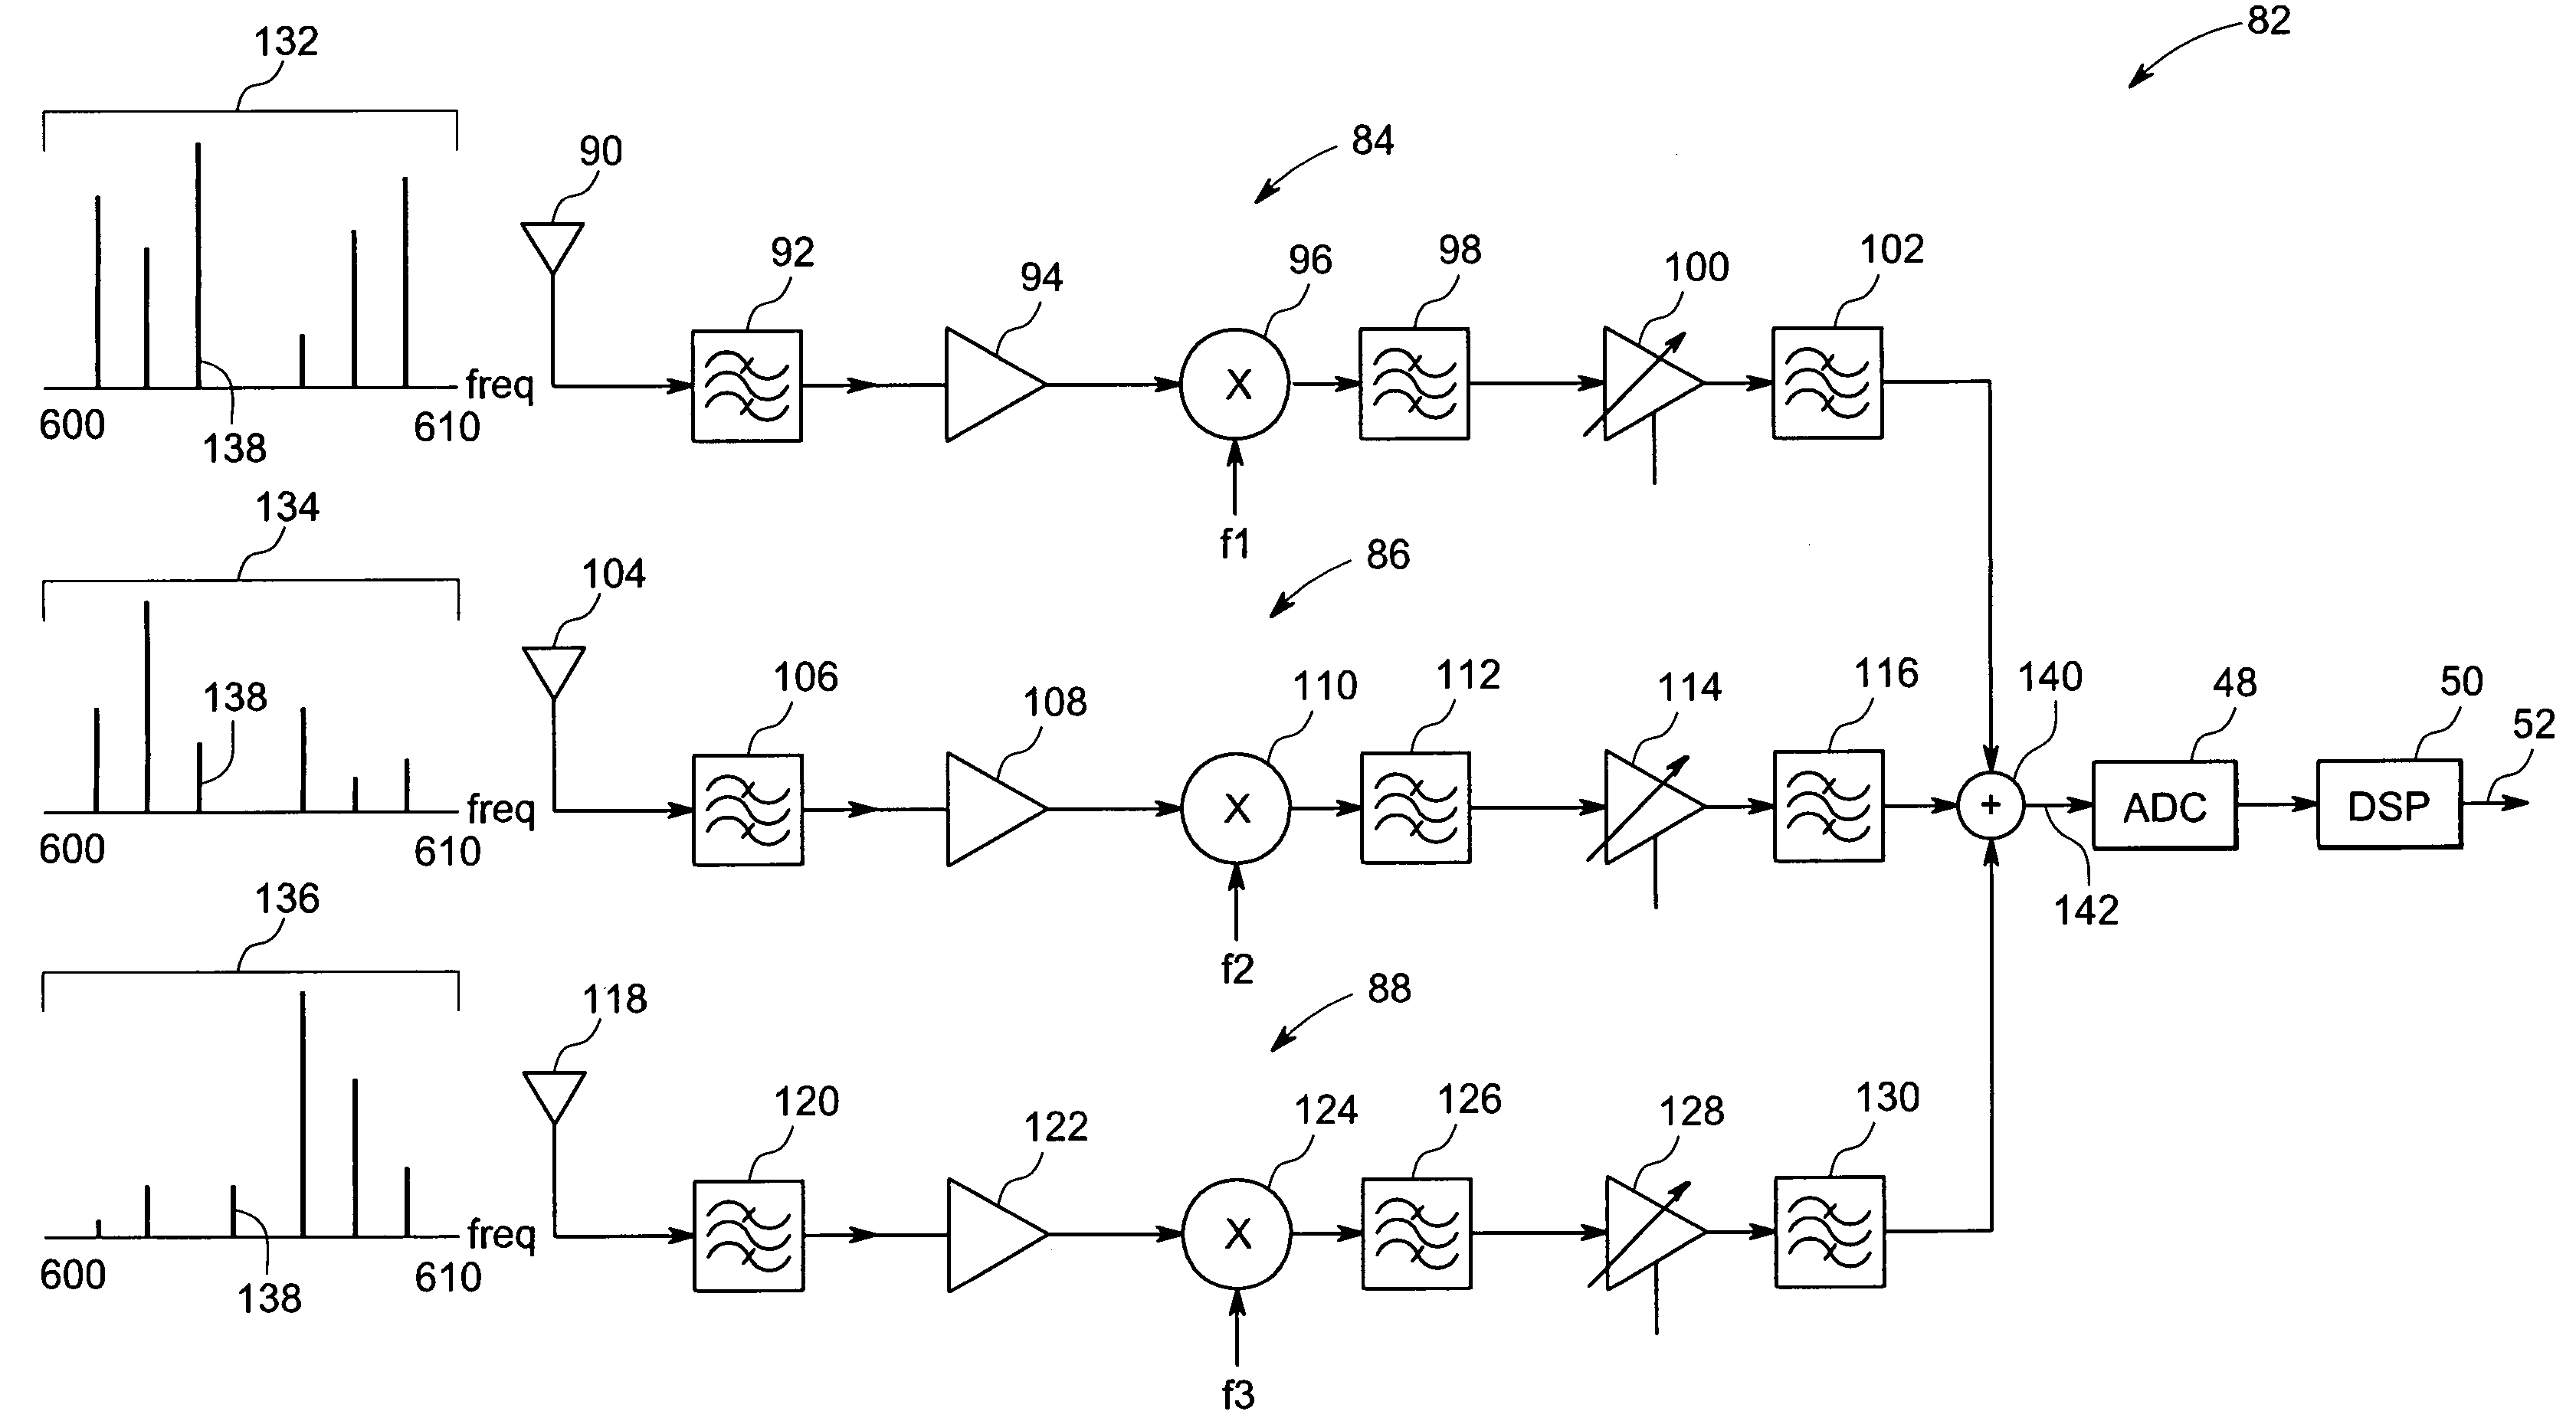 System and method of communicating signals